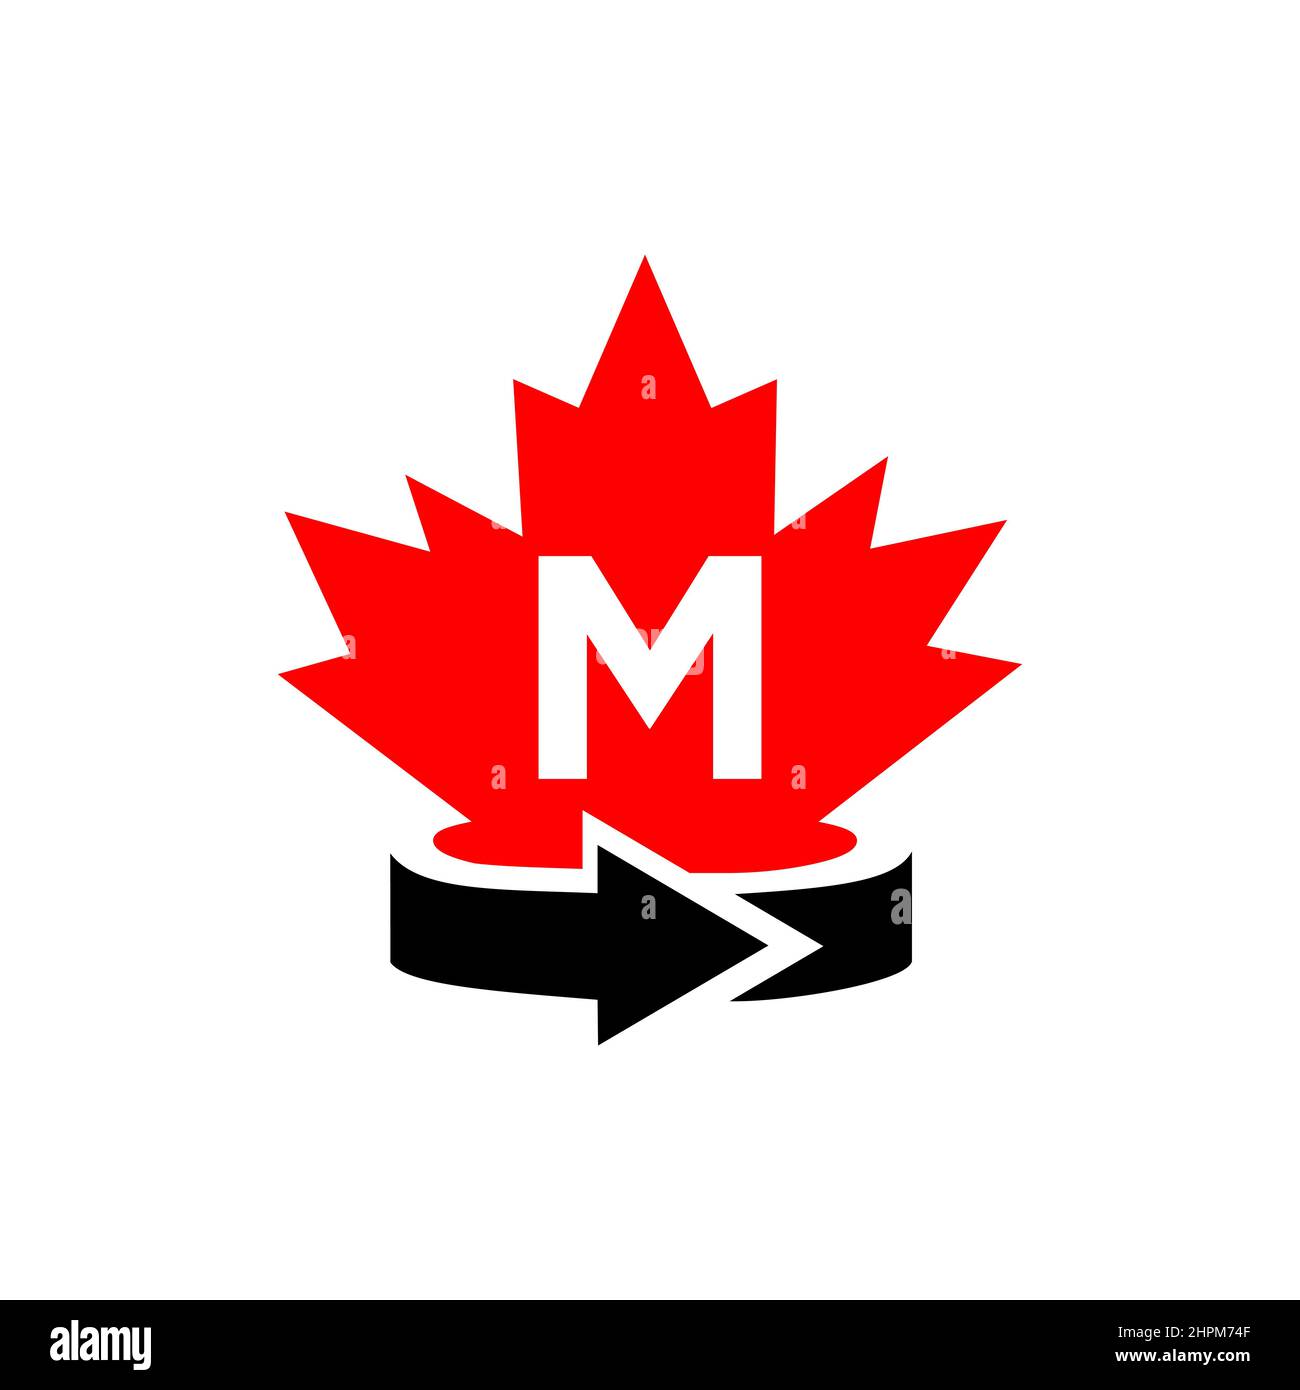 Canadian Maple Leaf Logo Design On Letter M Template. Red Maple Canadian Logotype With M Letter Vector Stock Vector